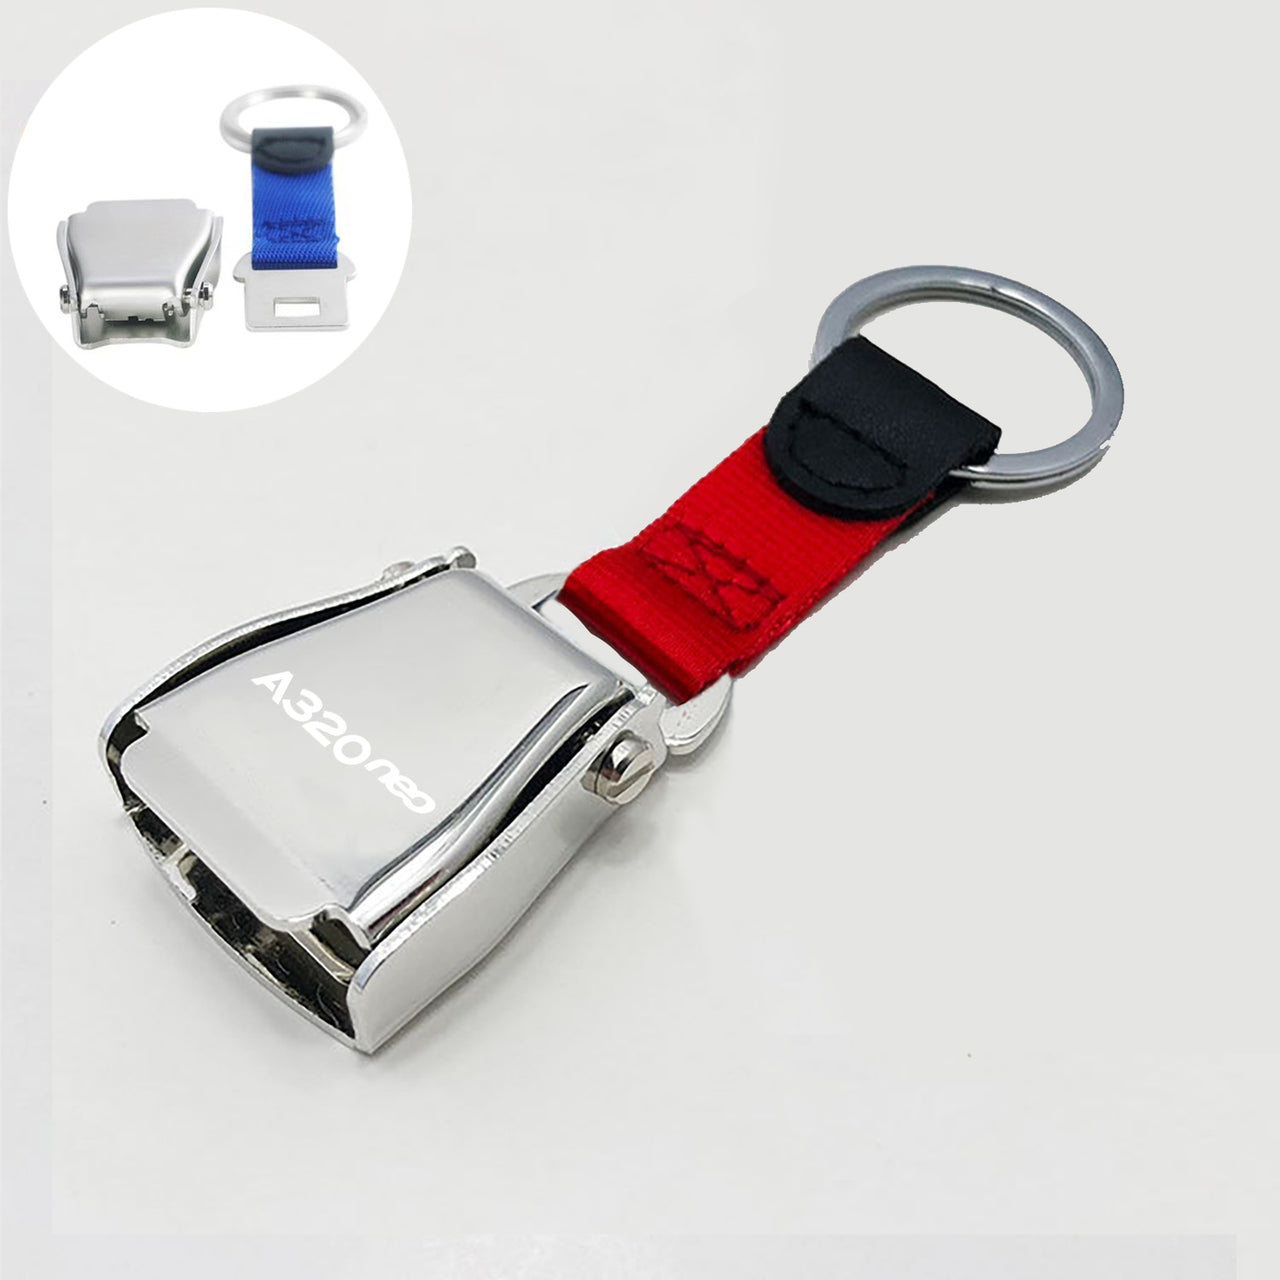 A320neo & Text Designed Airplane Seat Belt Key Chains